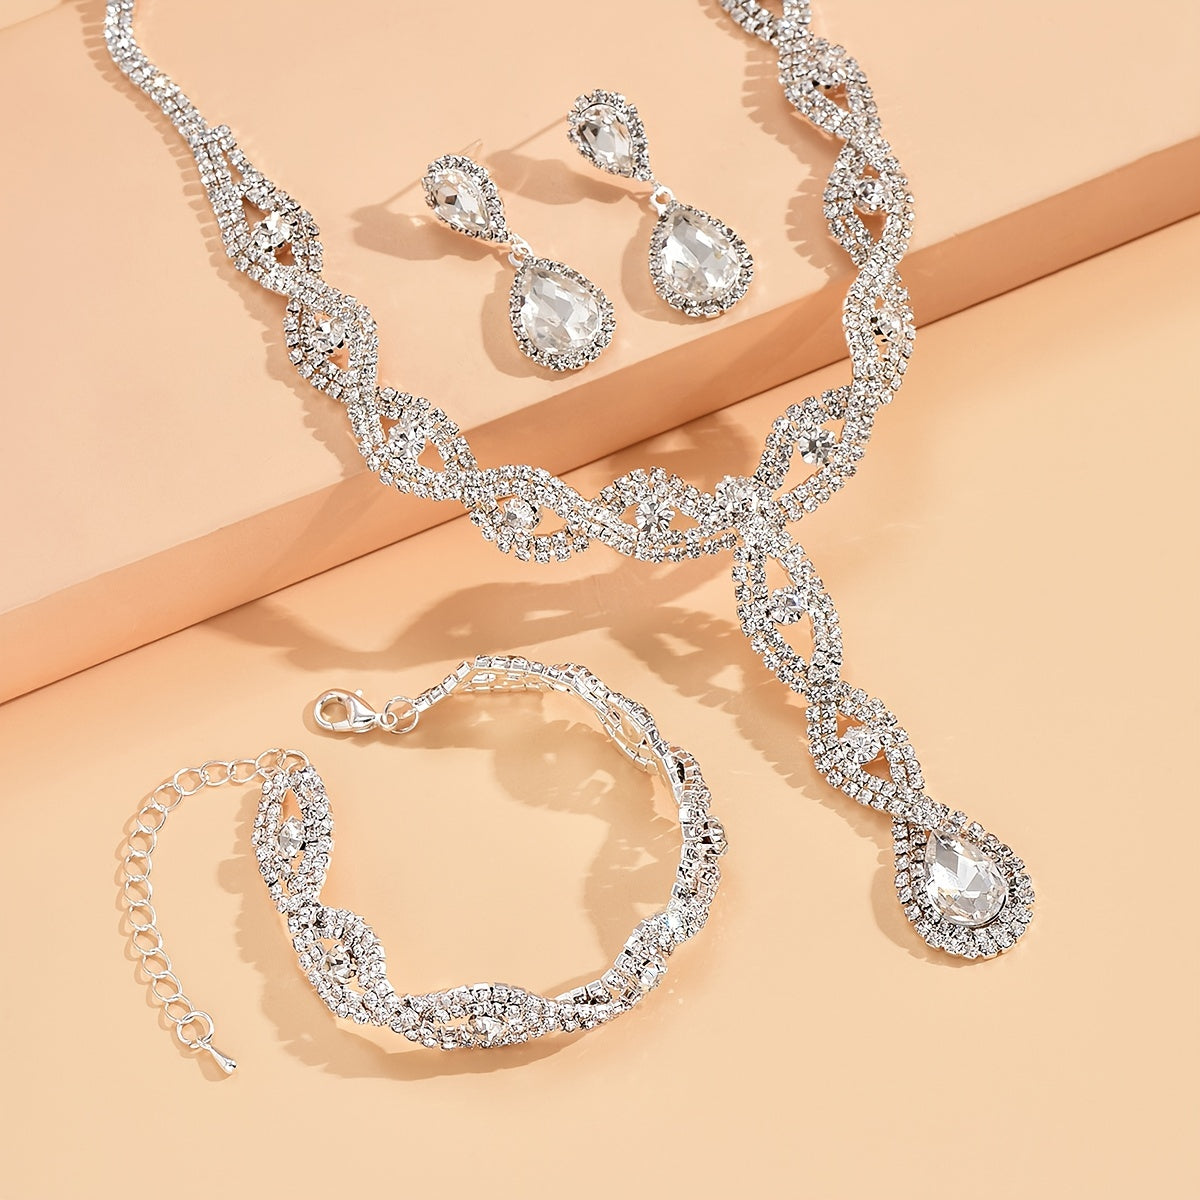 3pcs Elegant Zircon Jewelry Set - Silver Plated Necklace, Earrings, and Bracelet for Weddings, Engagements, and Birthdays - Perfect Gift for Women and Girls